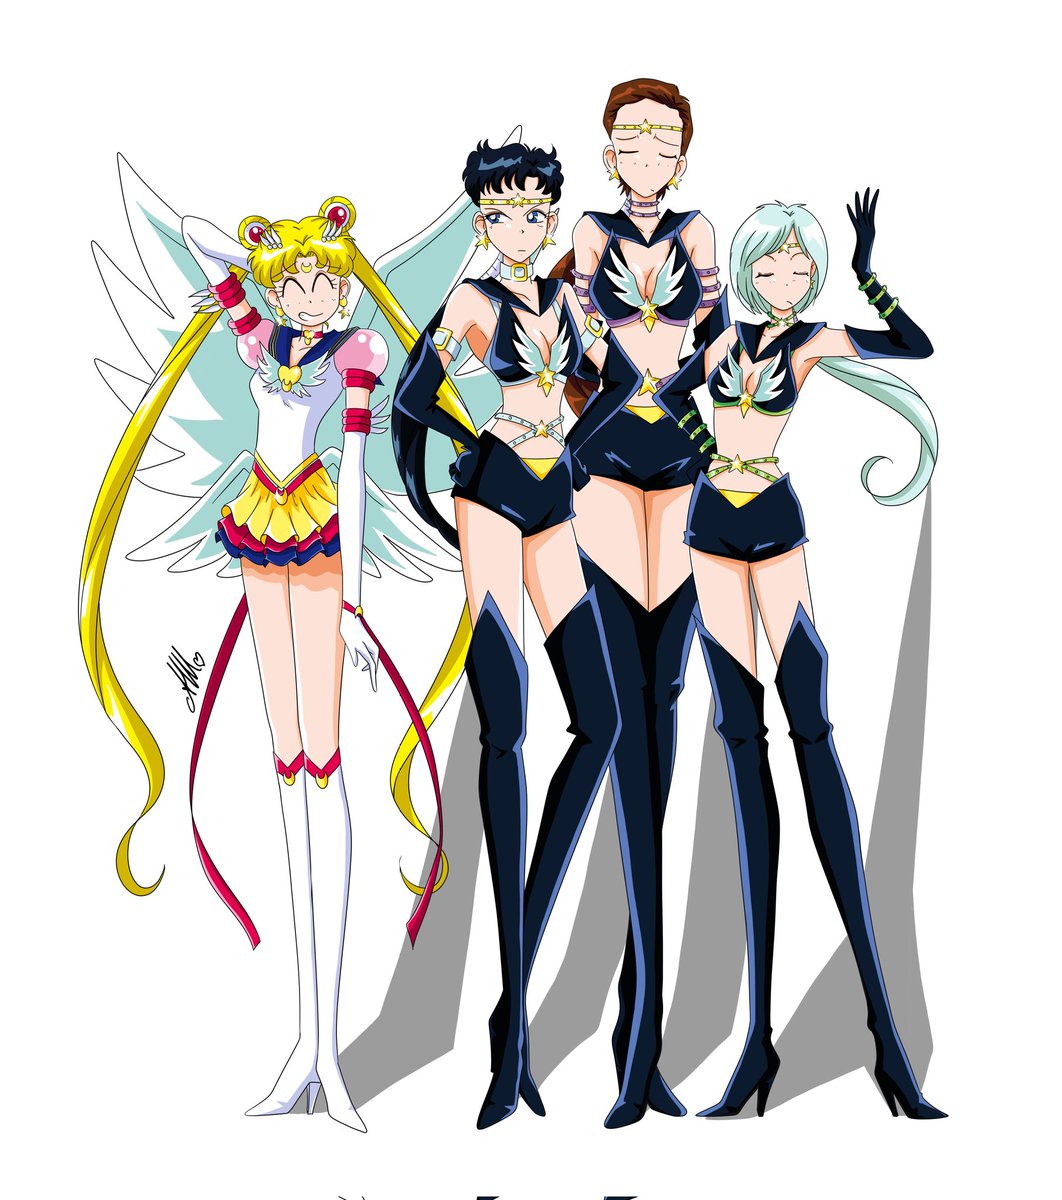 🌟a small reinterpretation taken from the #sailormoonstars artbook I changed almost nothing from the original image I only created the first version. the second in the funny version is untouchable. hope you like it. 🌟#supersailormoon  #sailormoonchallenge  #sailormoon #sailor